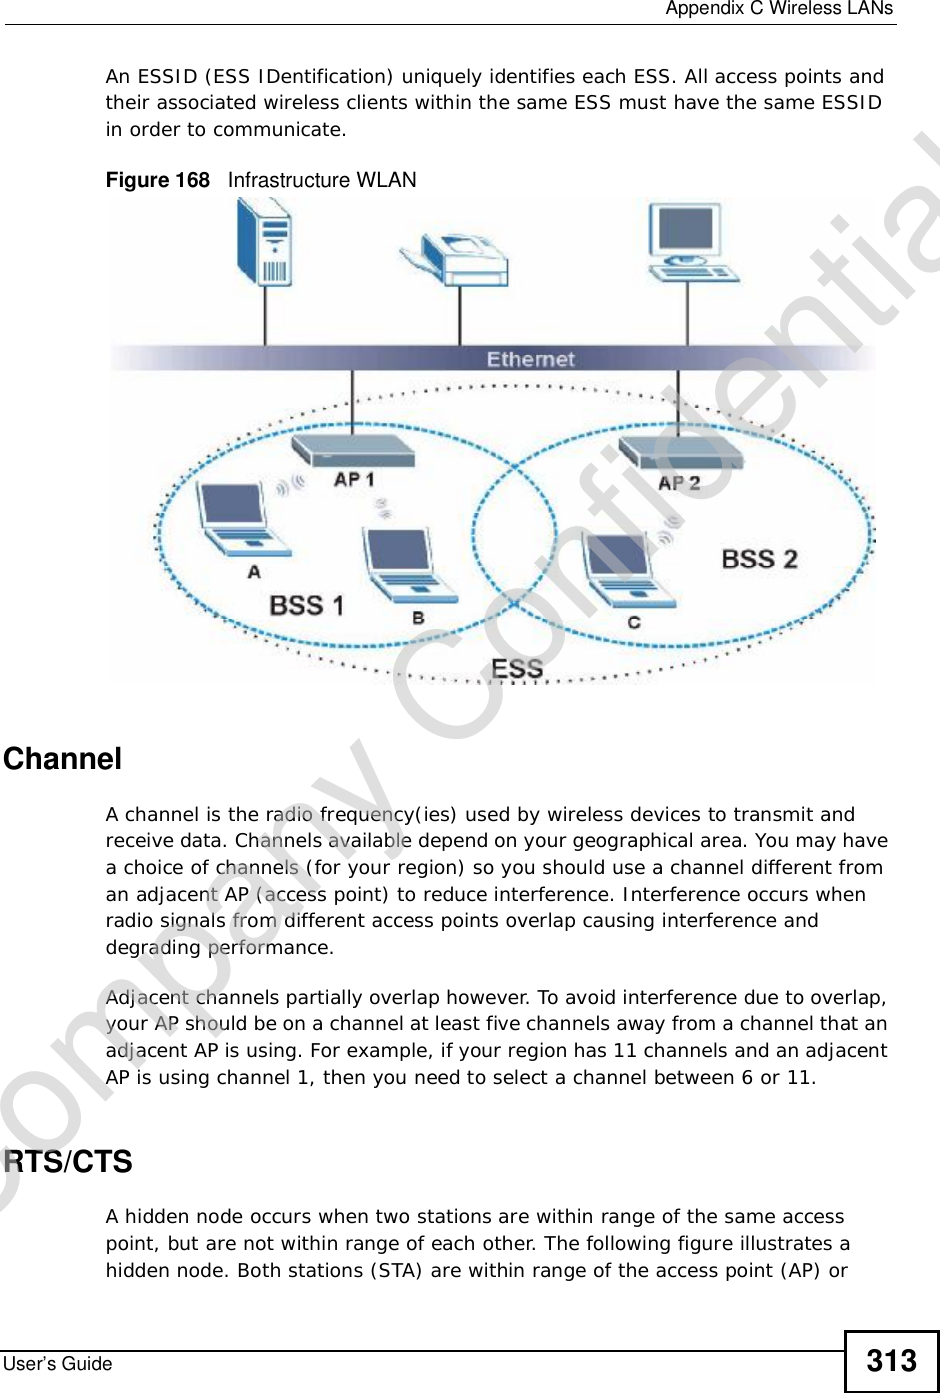  Appendix CWireless LANsUser’s Guide 313An ESSID (ESS IDentification) uniquely identifies each ESS. All access points and their associated wireless clients within the same ESS must have the same ESSID in order to communicate.Figure 168   Infrastructure WLANChannelA channel is the radio frequency(ies) used by wireless devices to transmit and receive data. Channels available depend on your geographical area. You may have a choice of channels (for your region) so you should use a channel different from an adjacent AP (access point) to reduce interference. Interference occurs when radio signals from different access points overlap causing interference and degrading performance.Adjacent channels partially overlap however. To avoid interference due to overlap, your AP should be on a channel at least five channels away from a channel that an adjacent AP is using. For example, if your region has 11 channels and an adjacent AP is using channel 1, then you need to select a channel between 6 or 11.RTS/CTSA hidden node occurs when two stations are within range of the same access point, but are not within range of each other. The following figure illustrates a hidden node. Both stations (STA) are within range of the access point (AP) or Company Confidential